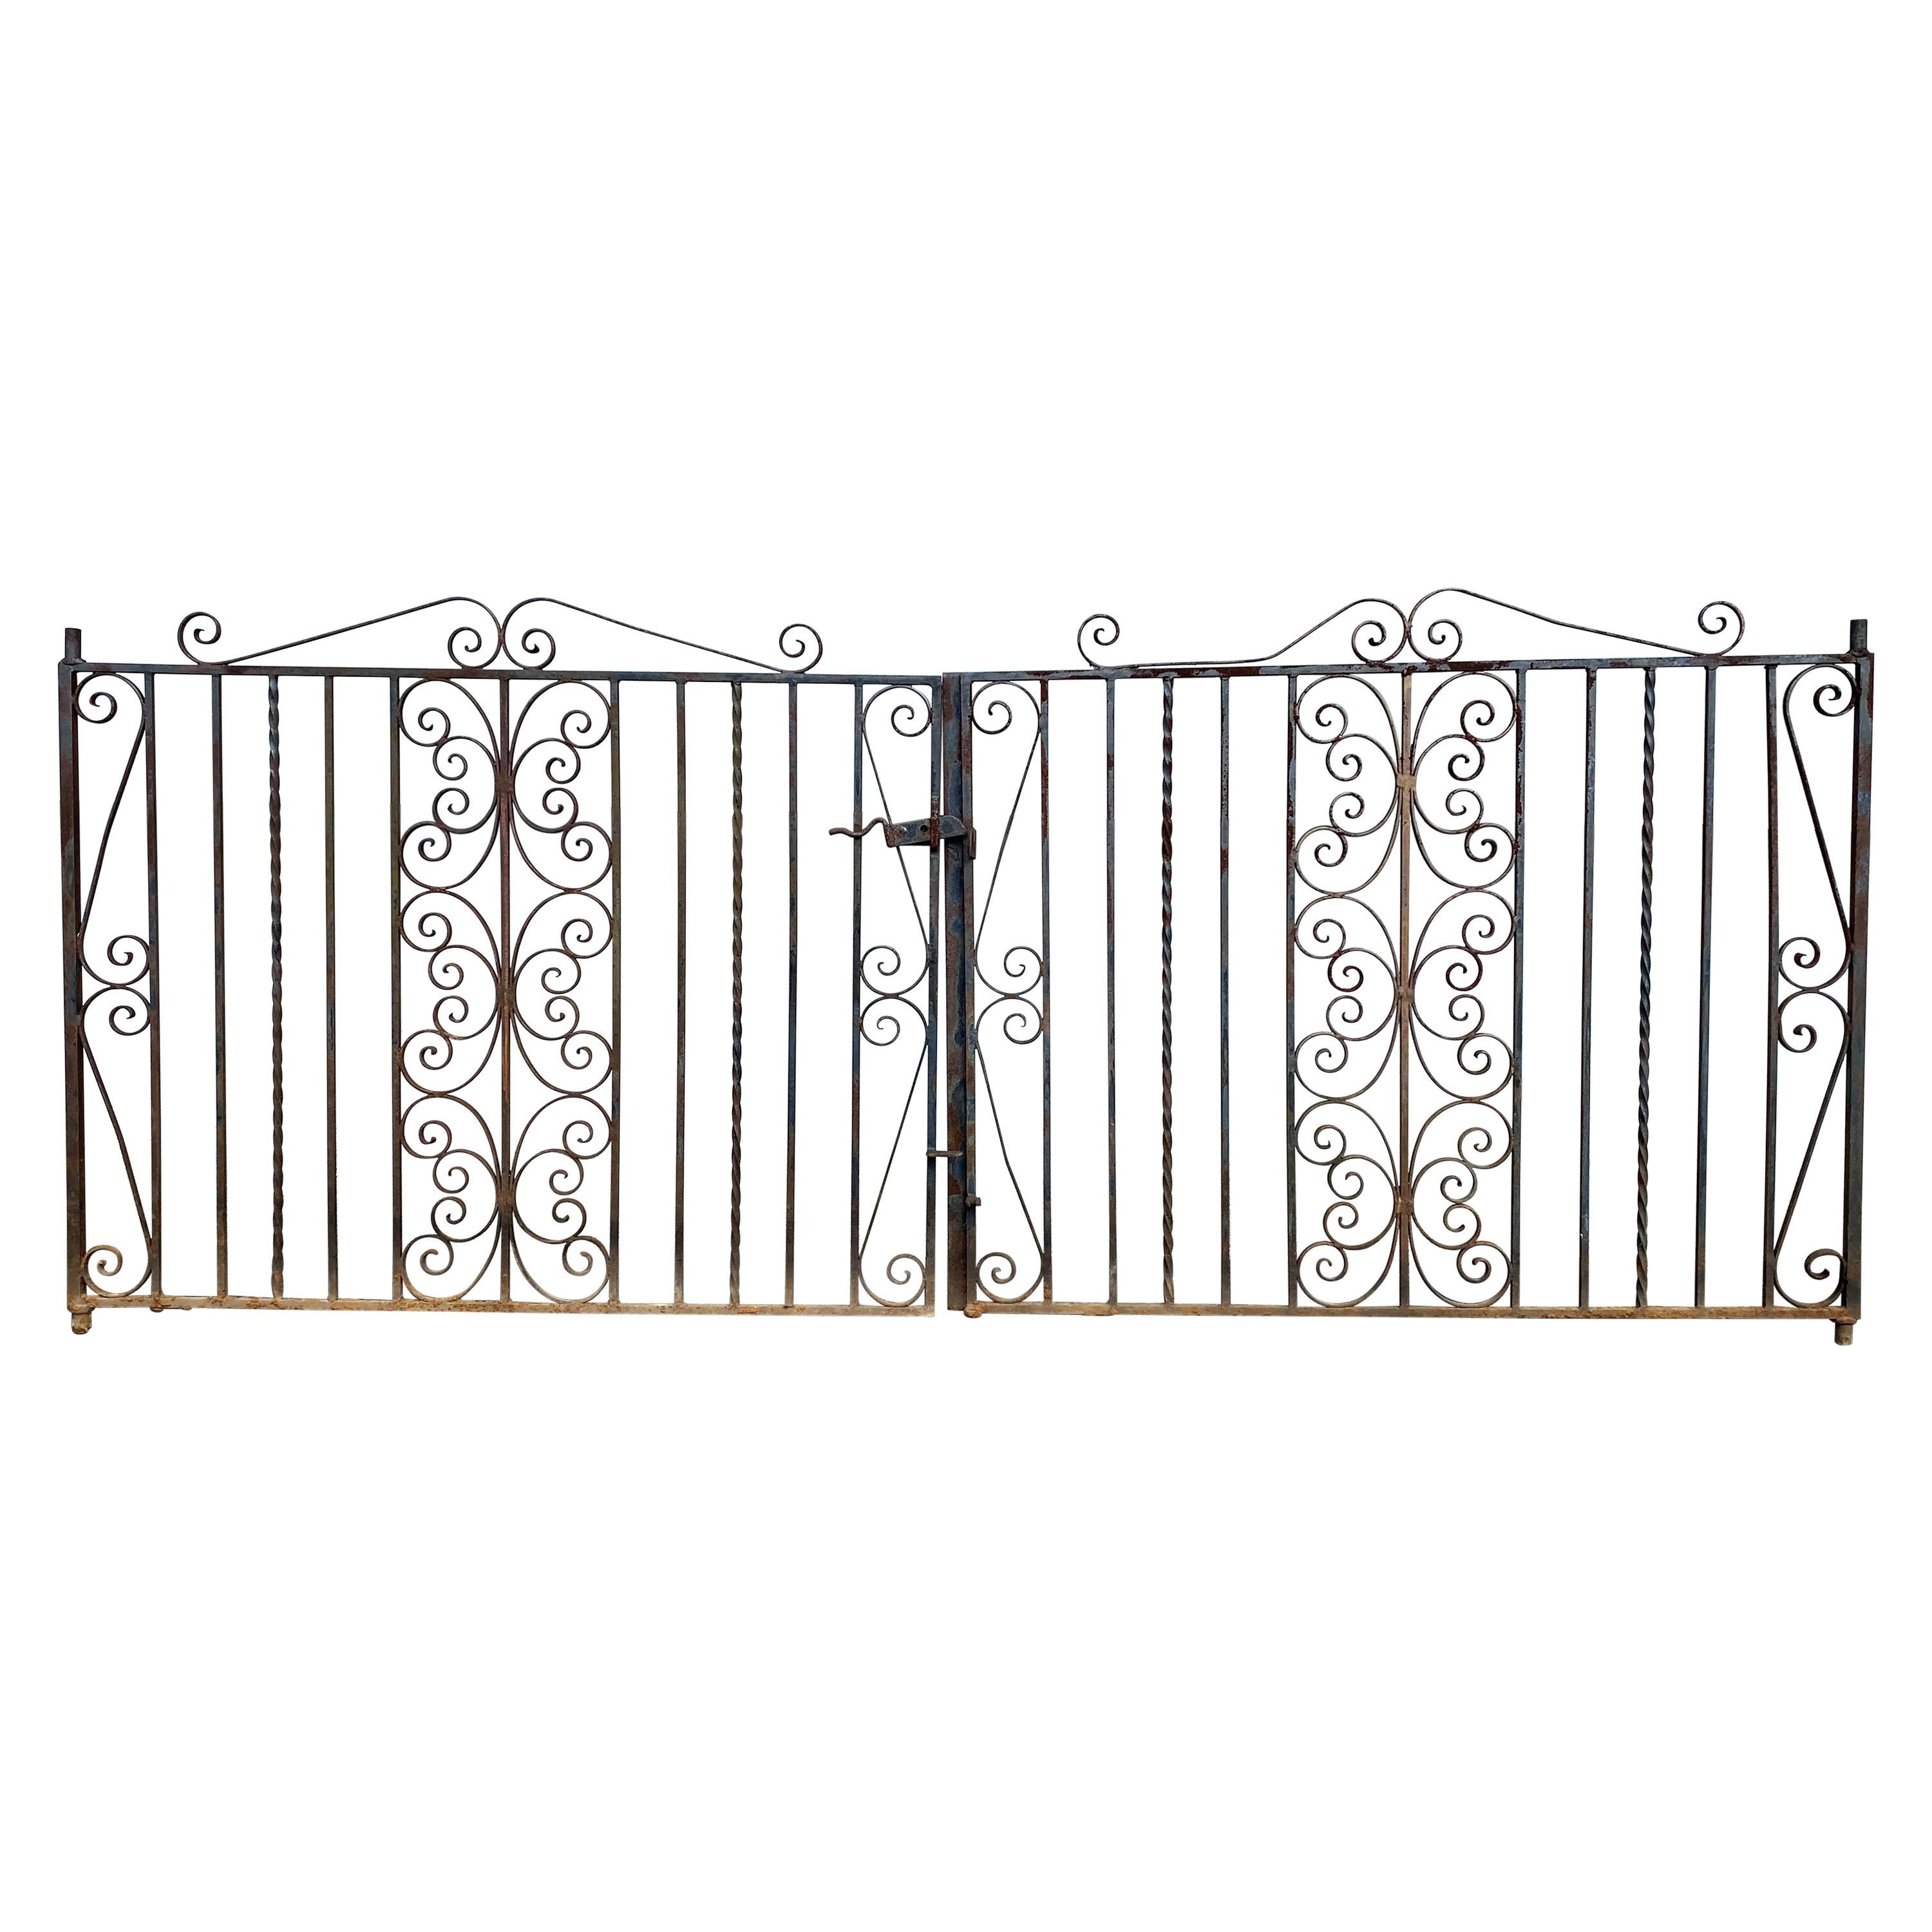 Pair of Iron Gates with Scrollwork Design